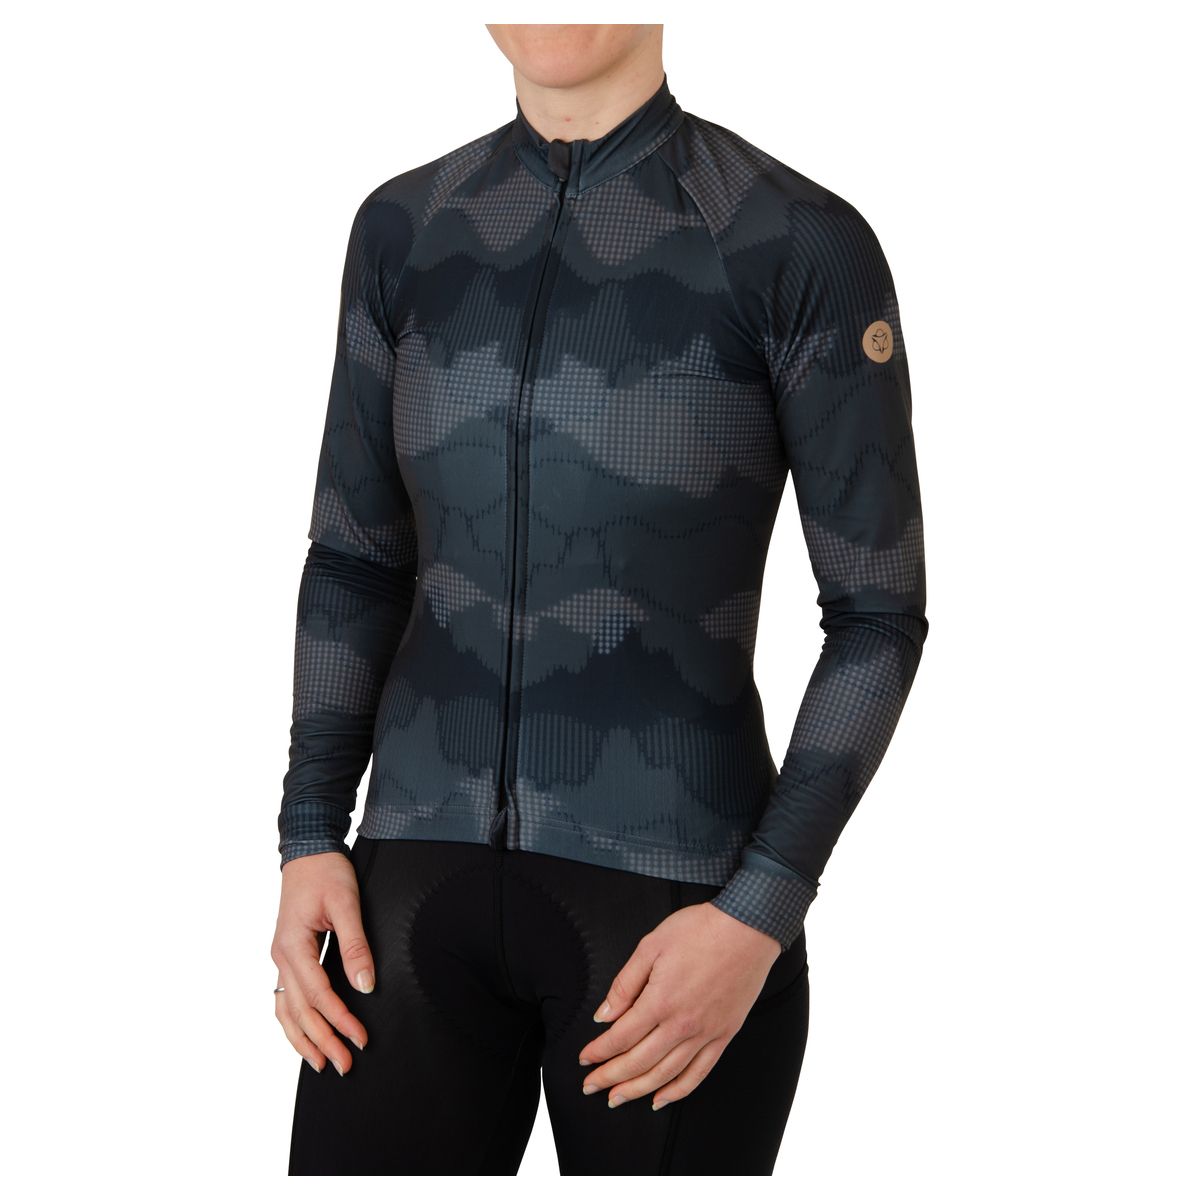 Gravel Maillot M/L Venture Mujeres fit example